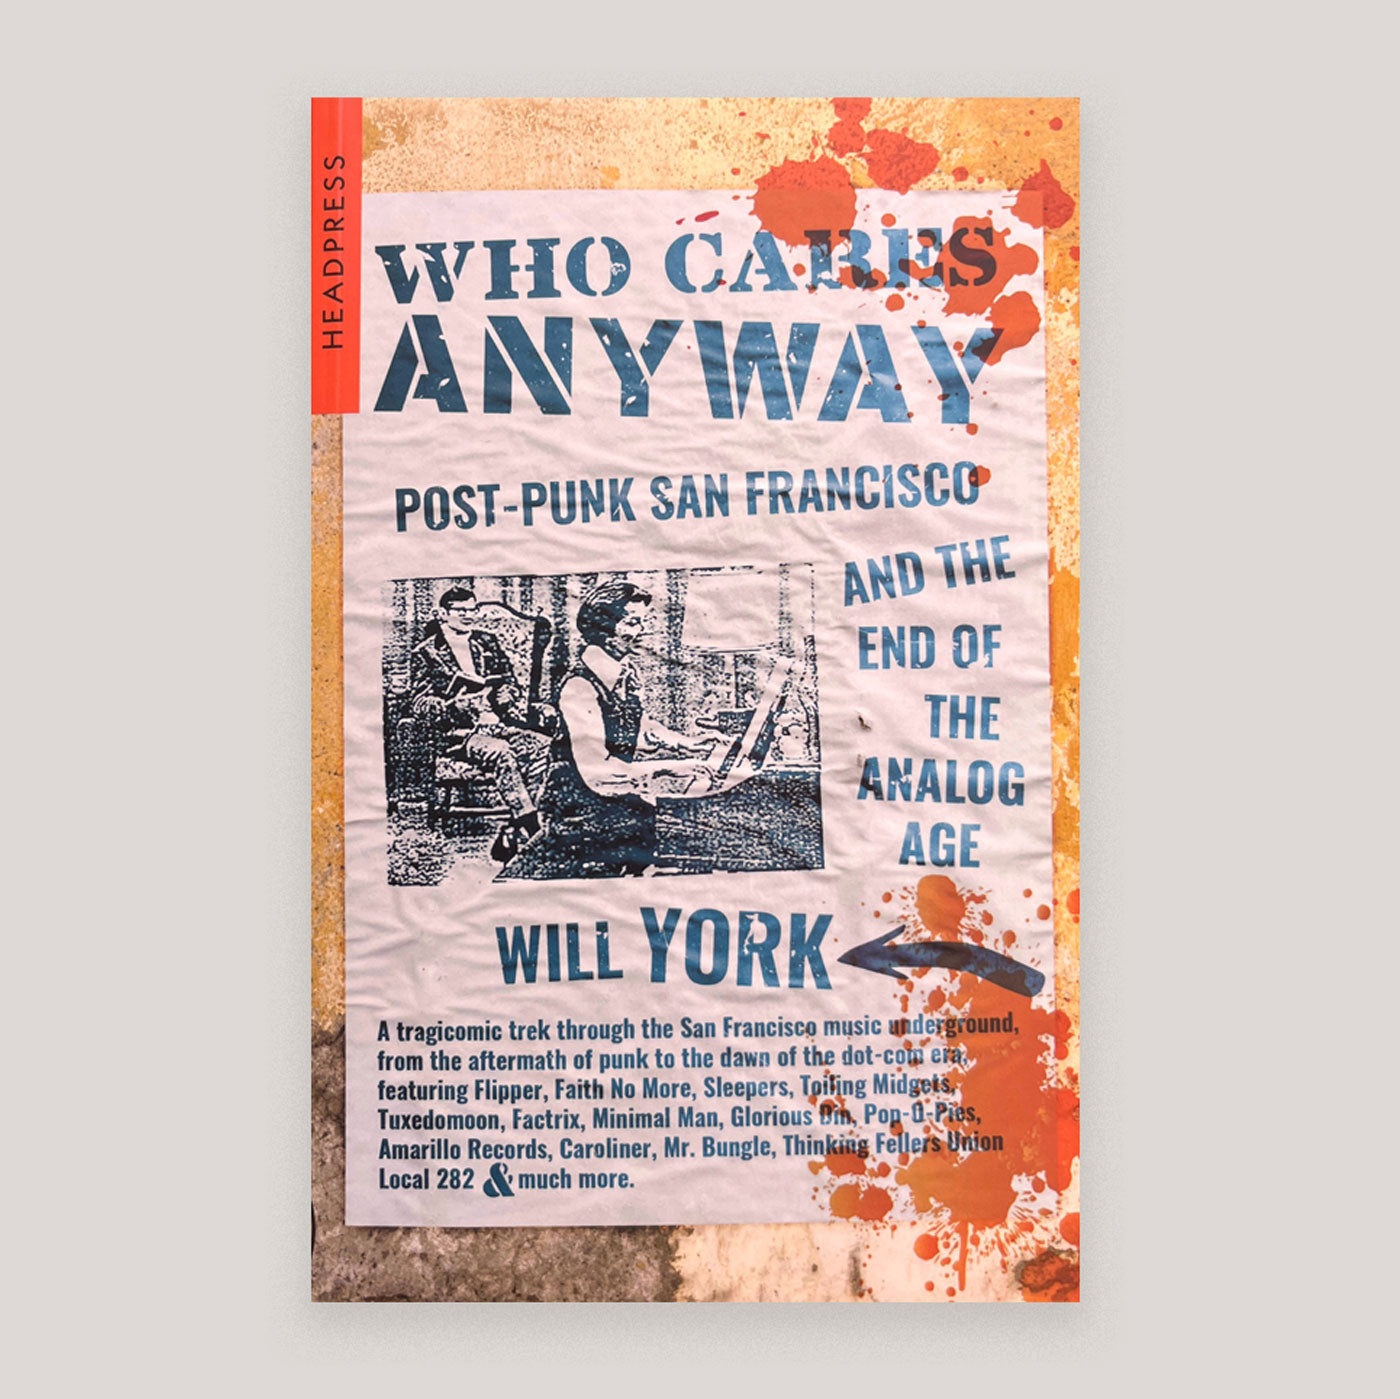 Who Cares Anyway? Post-Punk San Francisco and the End of the Analog Age | Will York | Colours May Vary 